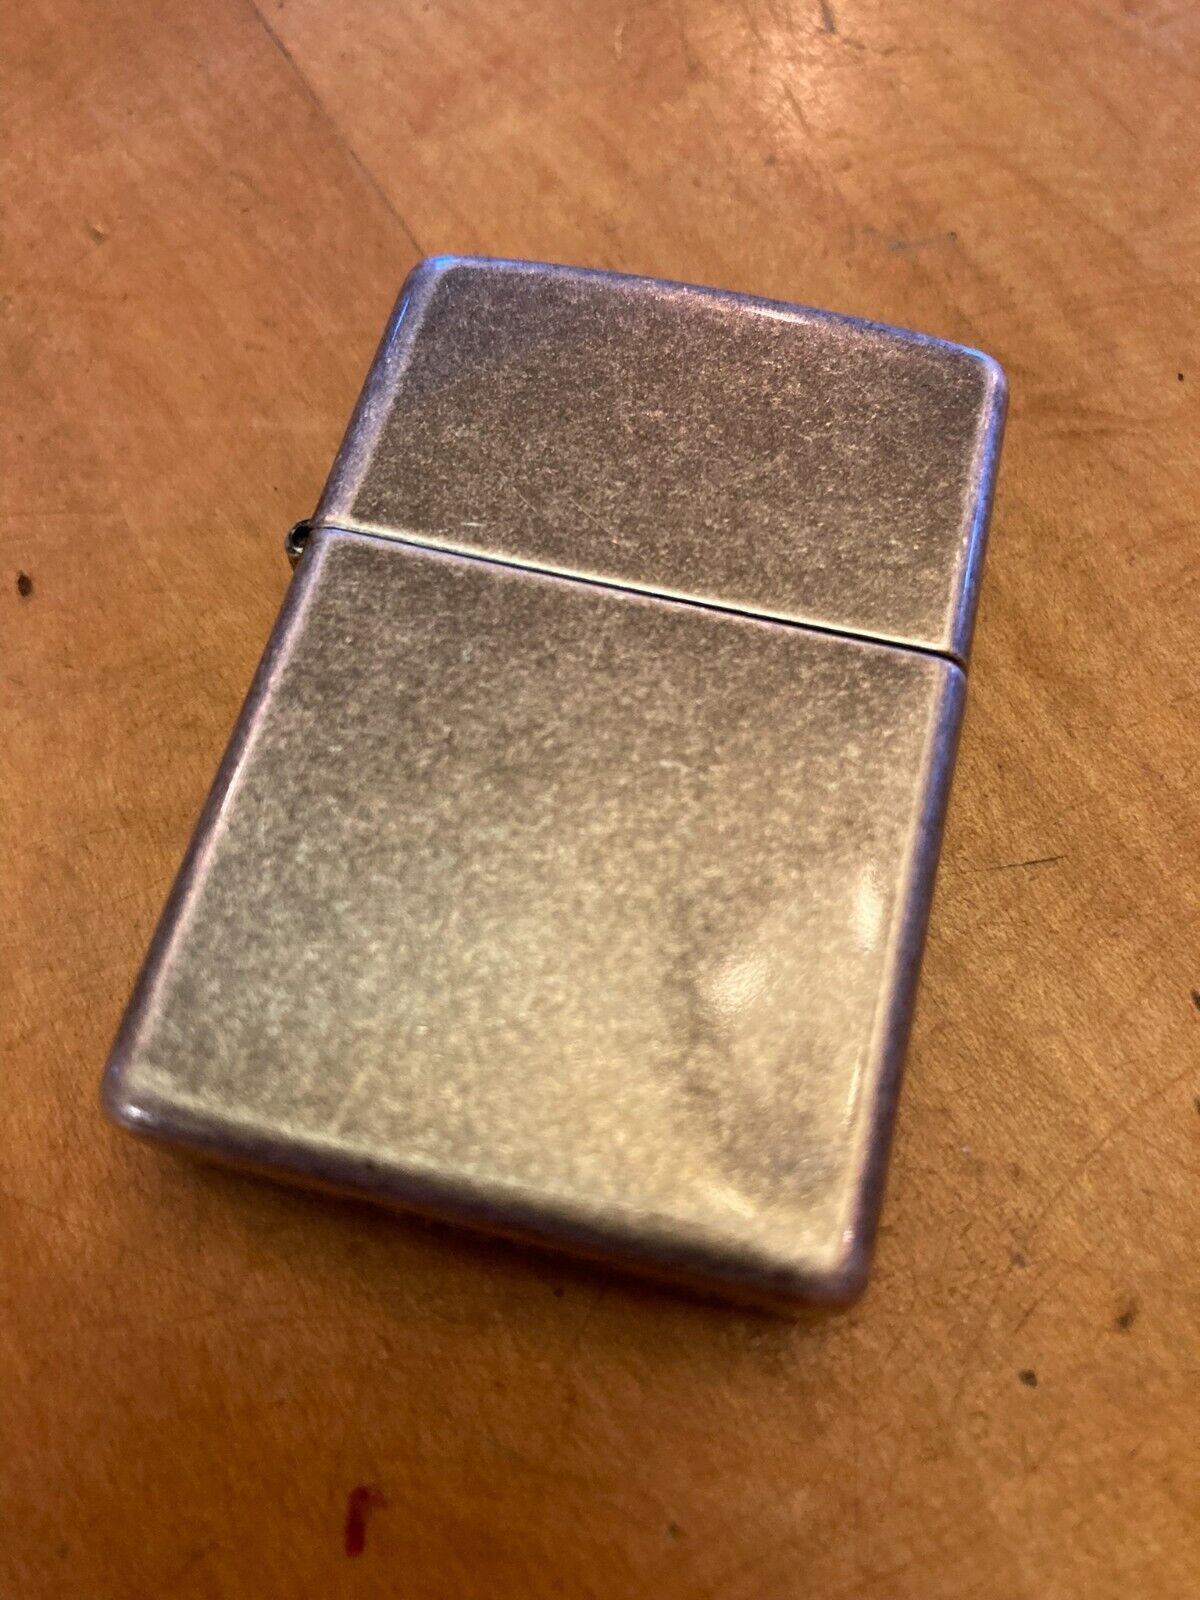 Genuine Zippo Antique Silver Plate Lighter CASE ONLY No Insert/Box